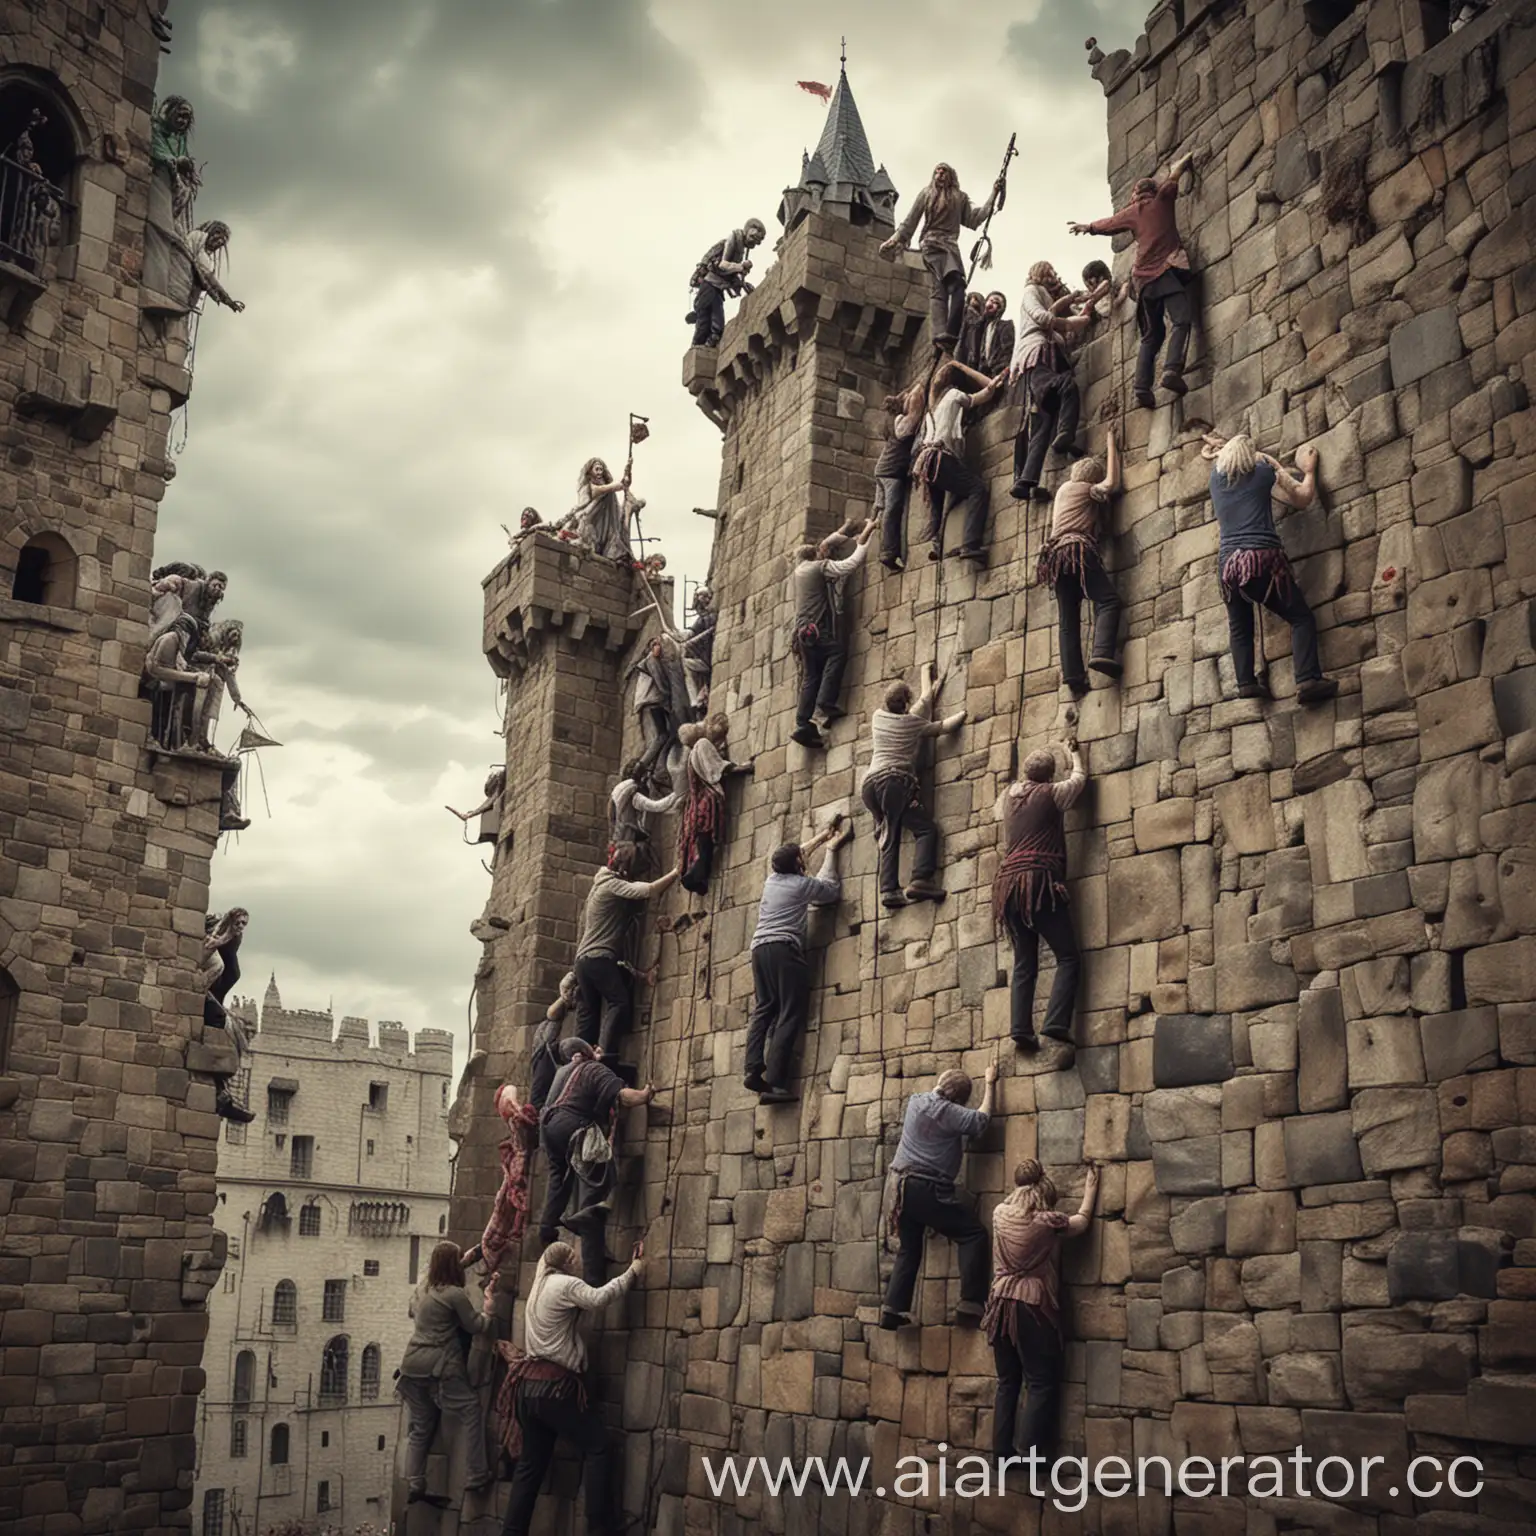 Zombie clients climbing up the wall of a castle demanding for drawings and quotations. Behind the wall of the castle are sales managers and designers.